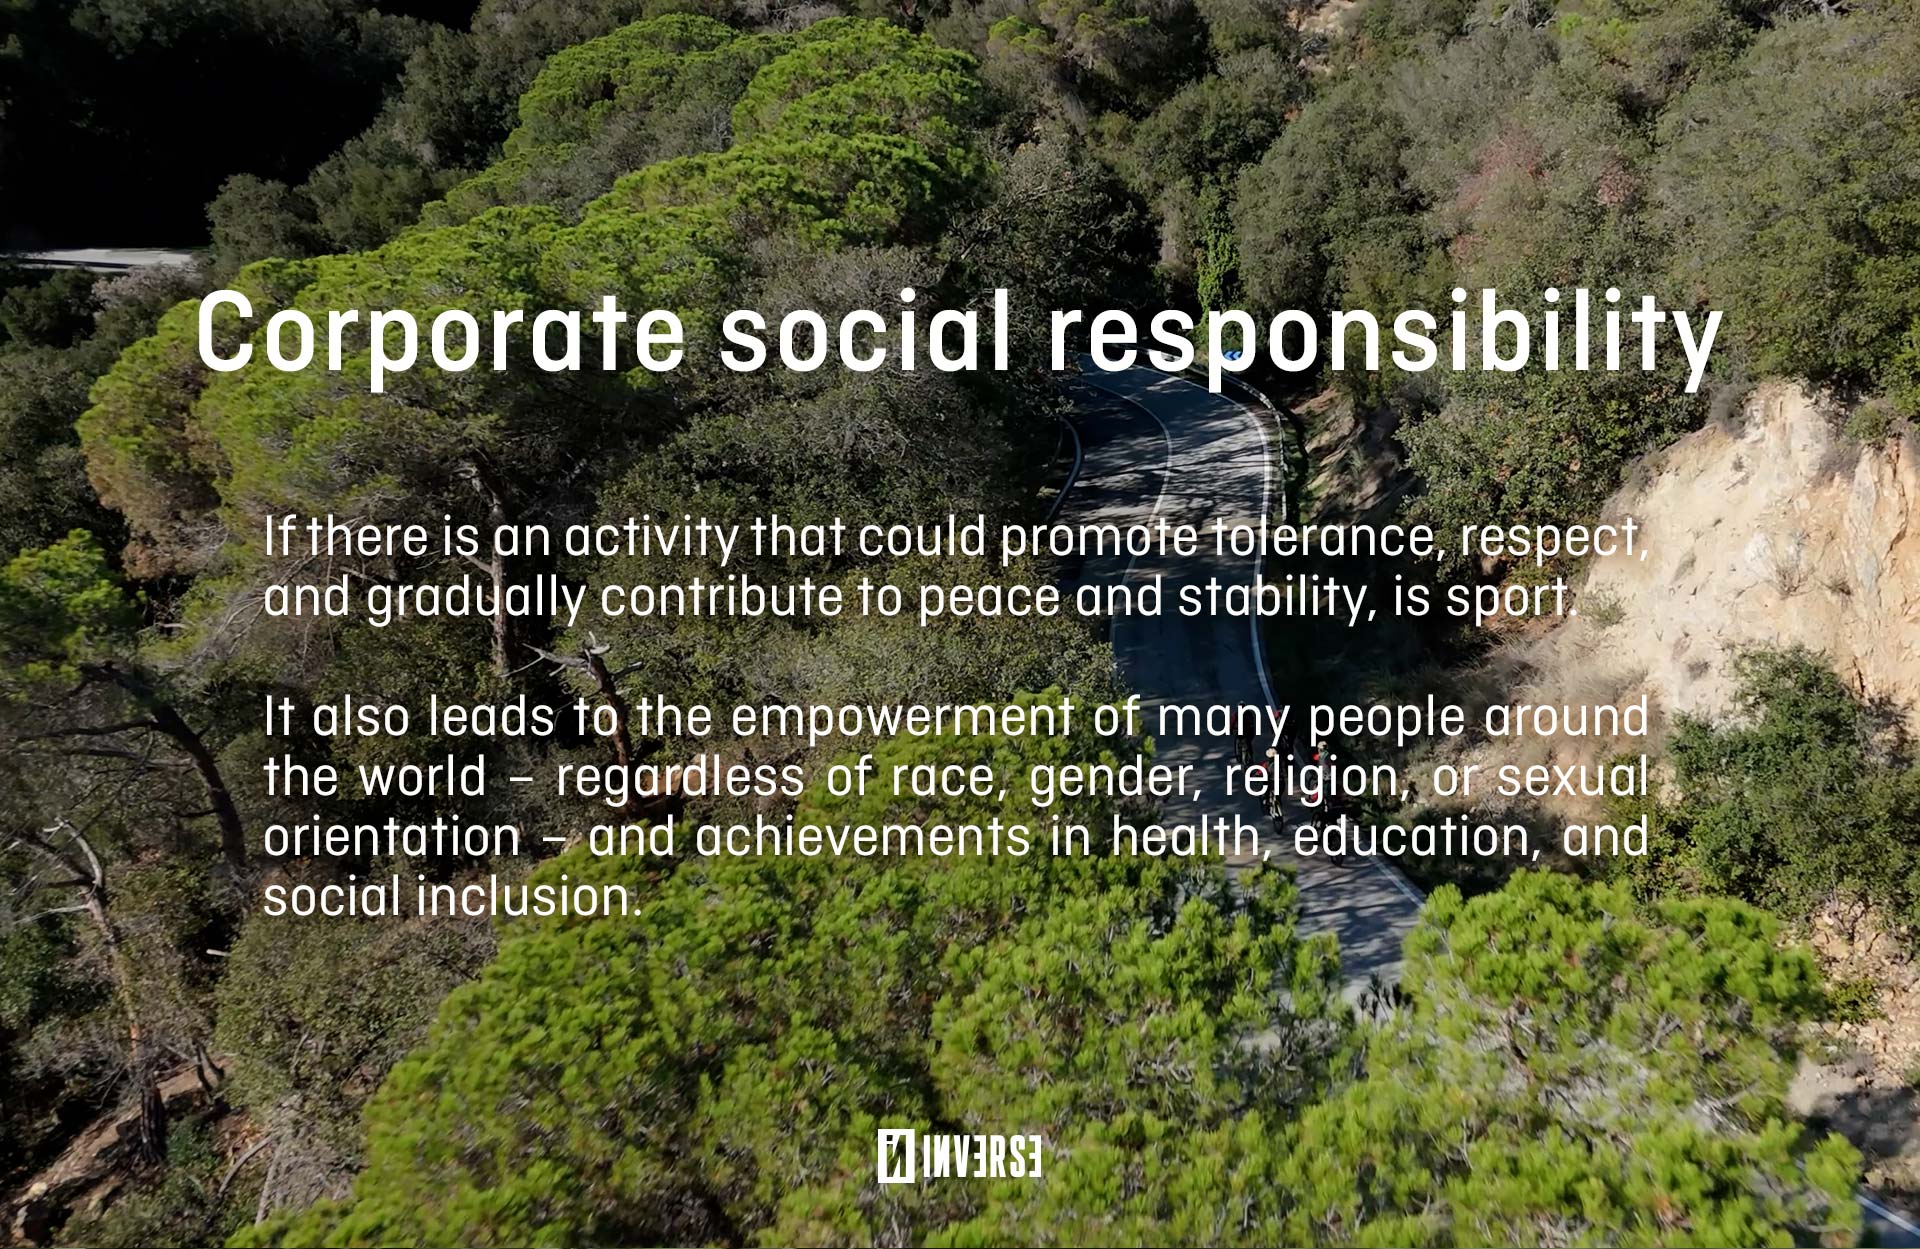 CORPORATE SOCIAL RESPONSIBILITY. If there is an activity that could promote tolerance, respect, and gradually contribute to peace and stability, is sport.